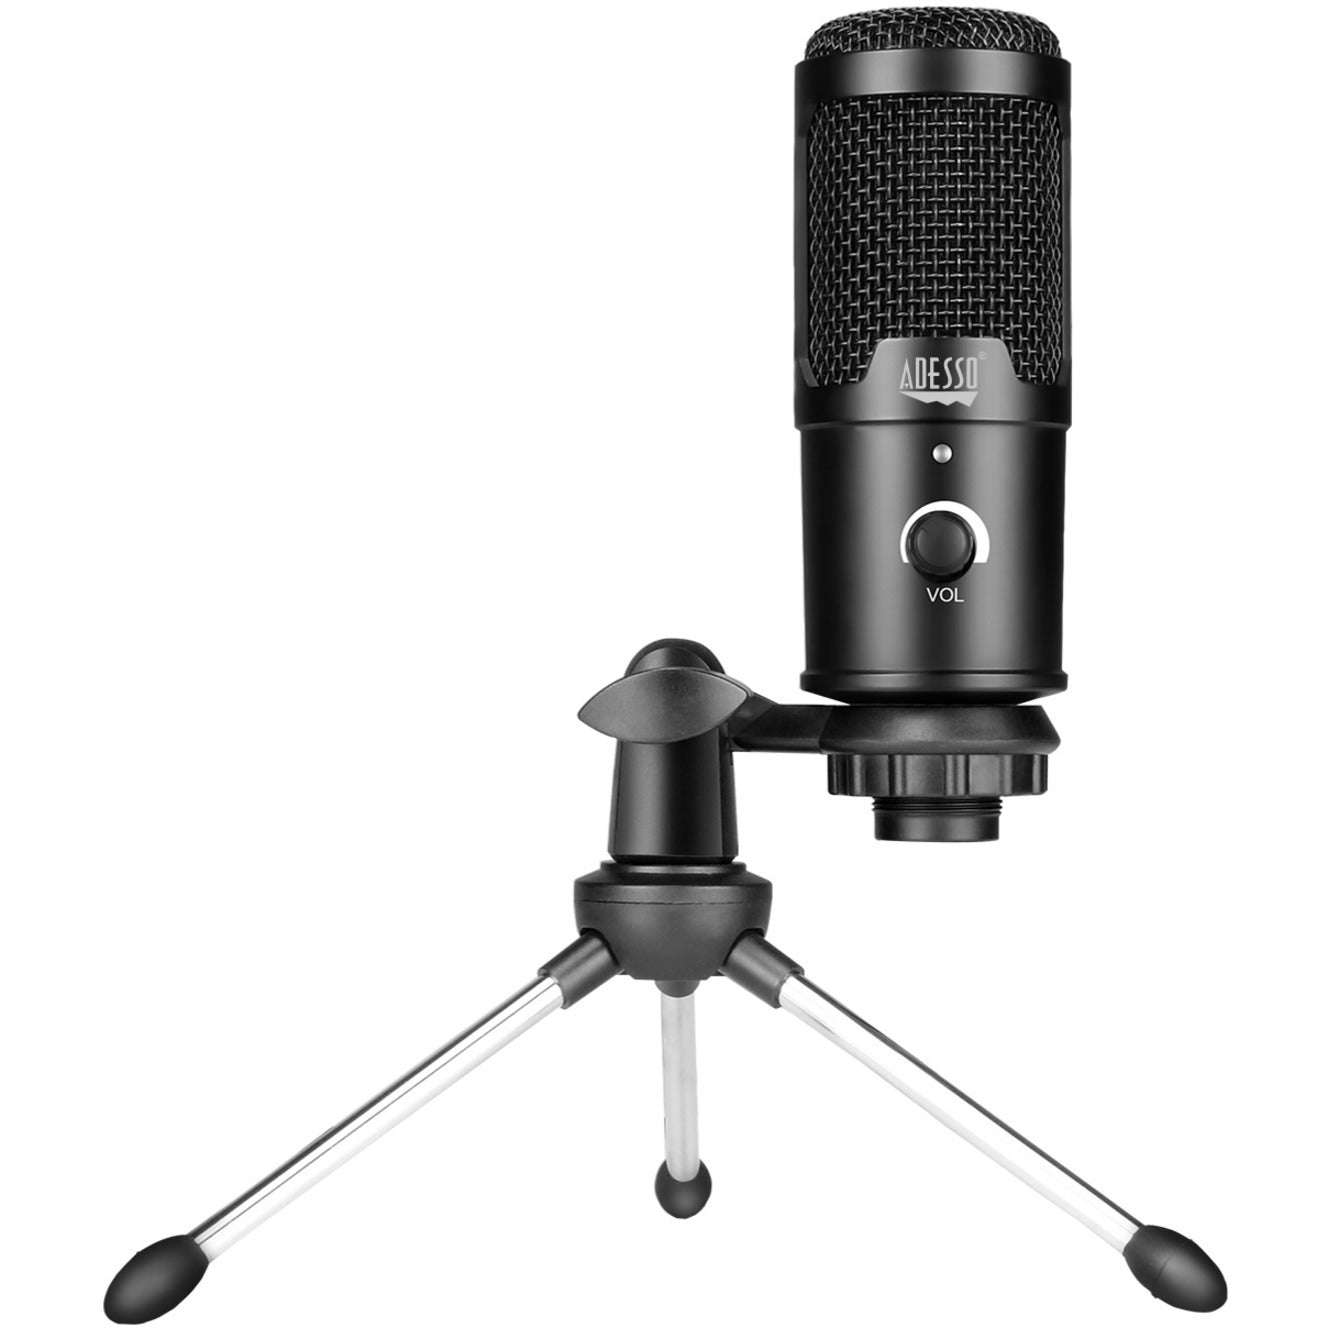 Adesso Xtream M4 Wired Condenser Microphone, Uni-directional Cardioid, USB Connectivity, Volume Control